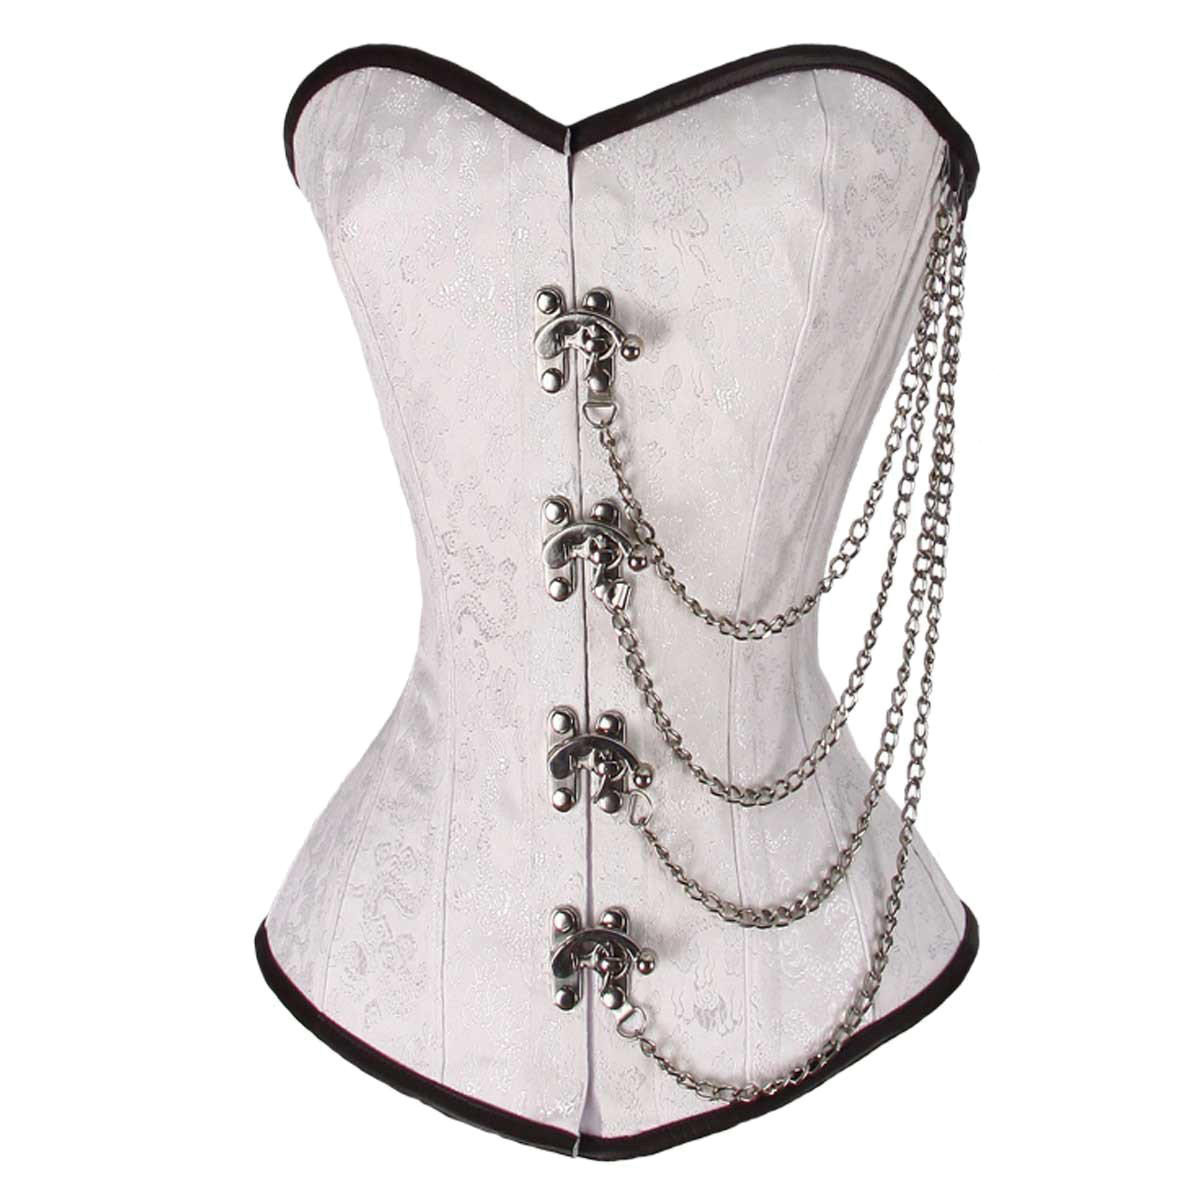 VC1401 Ladies Brocade Corset White with Chains